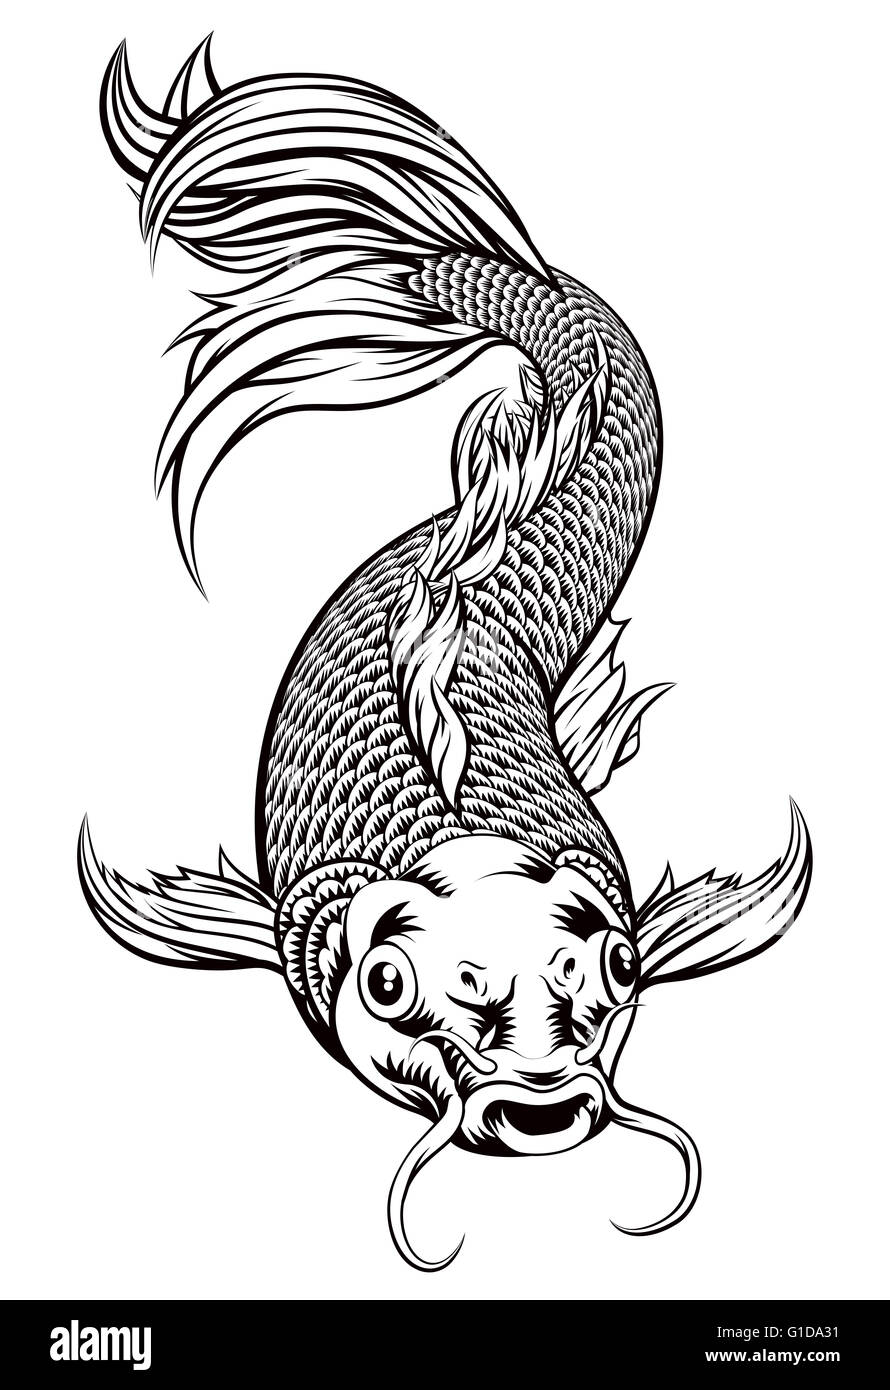 An original illustration of a koi carp fish in a vintage woodcut style  Stock Photo - Alamy